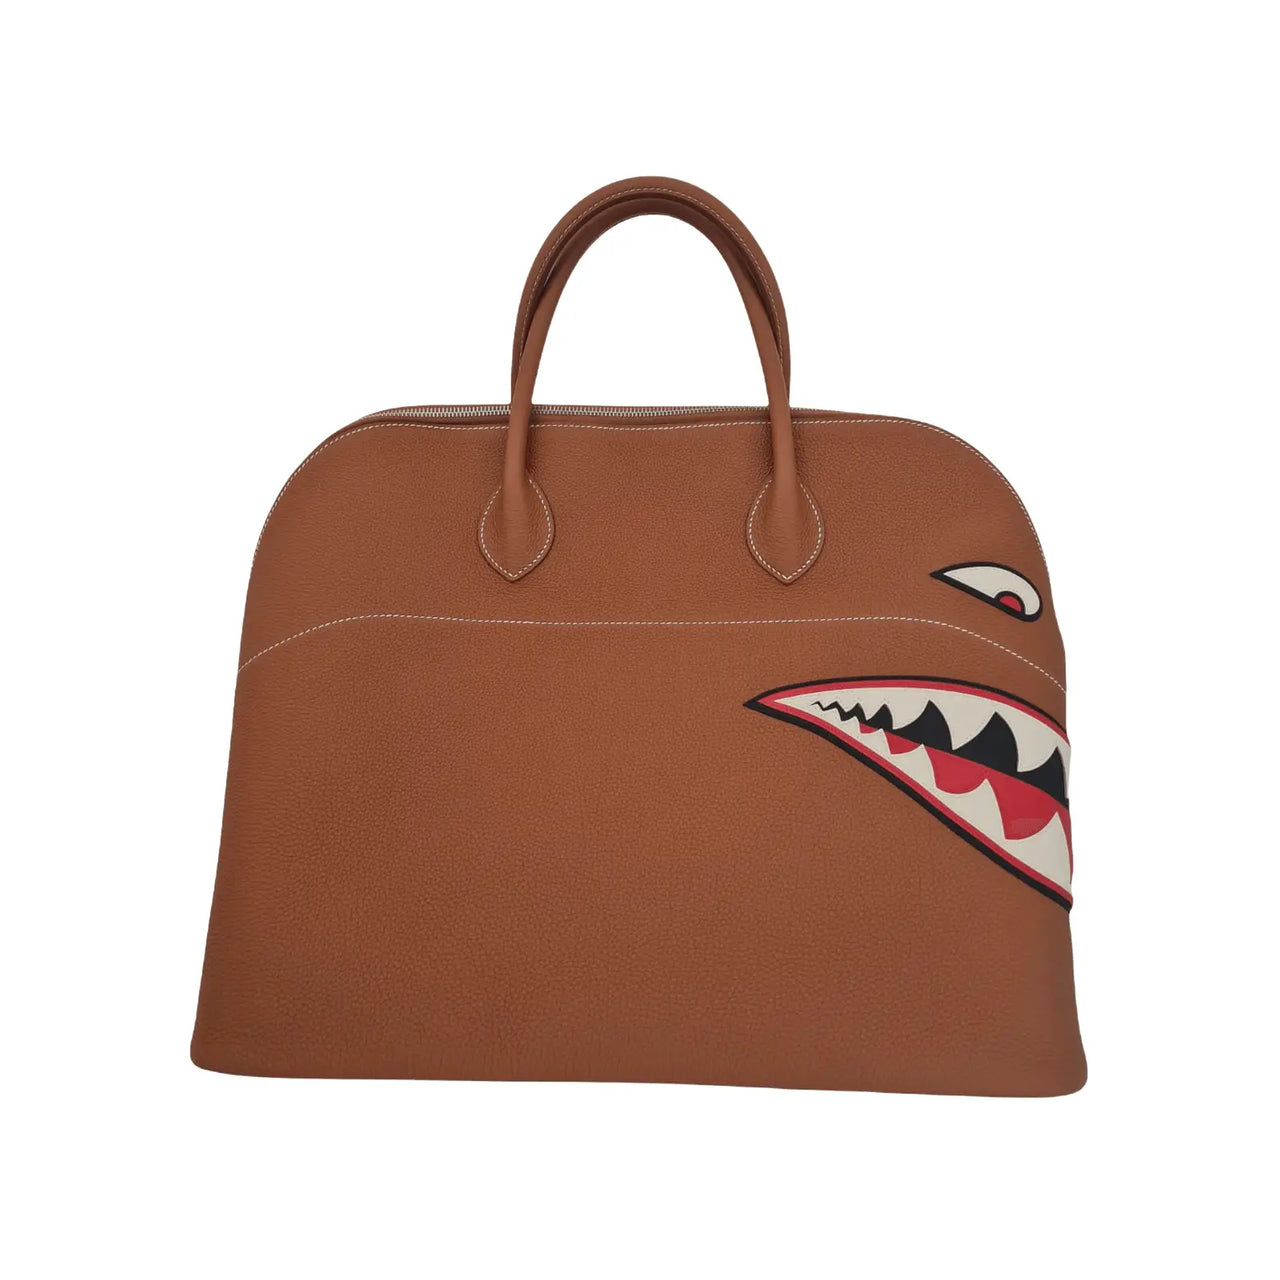 Hermes Bolide Bag Canvas with Leather 45